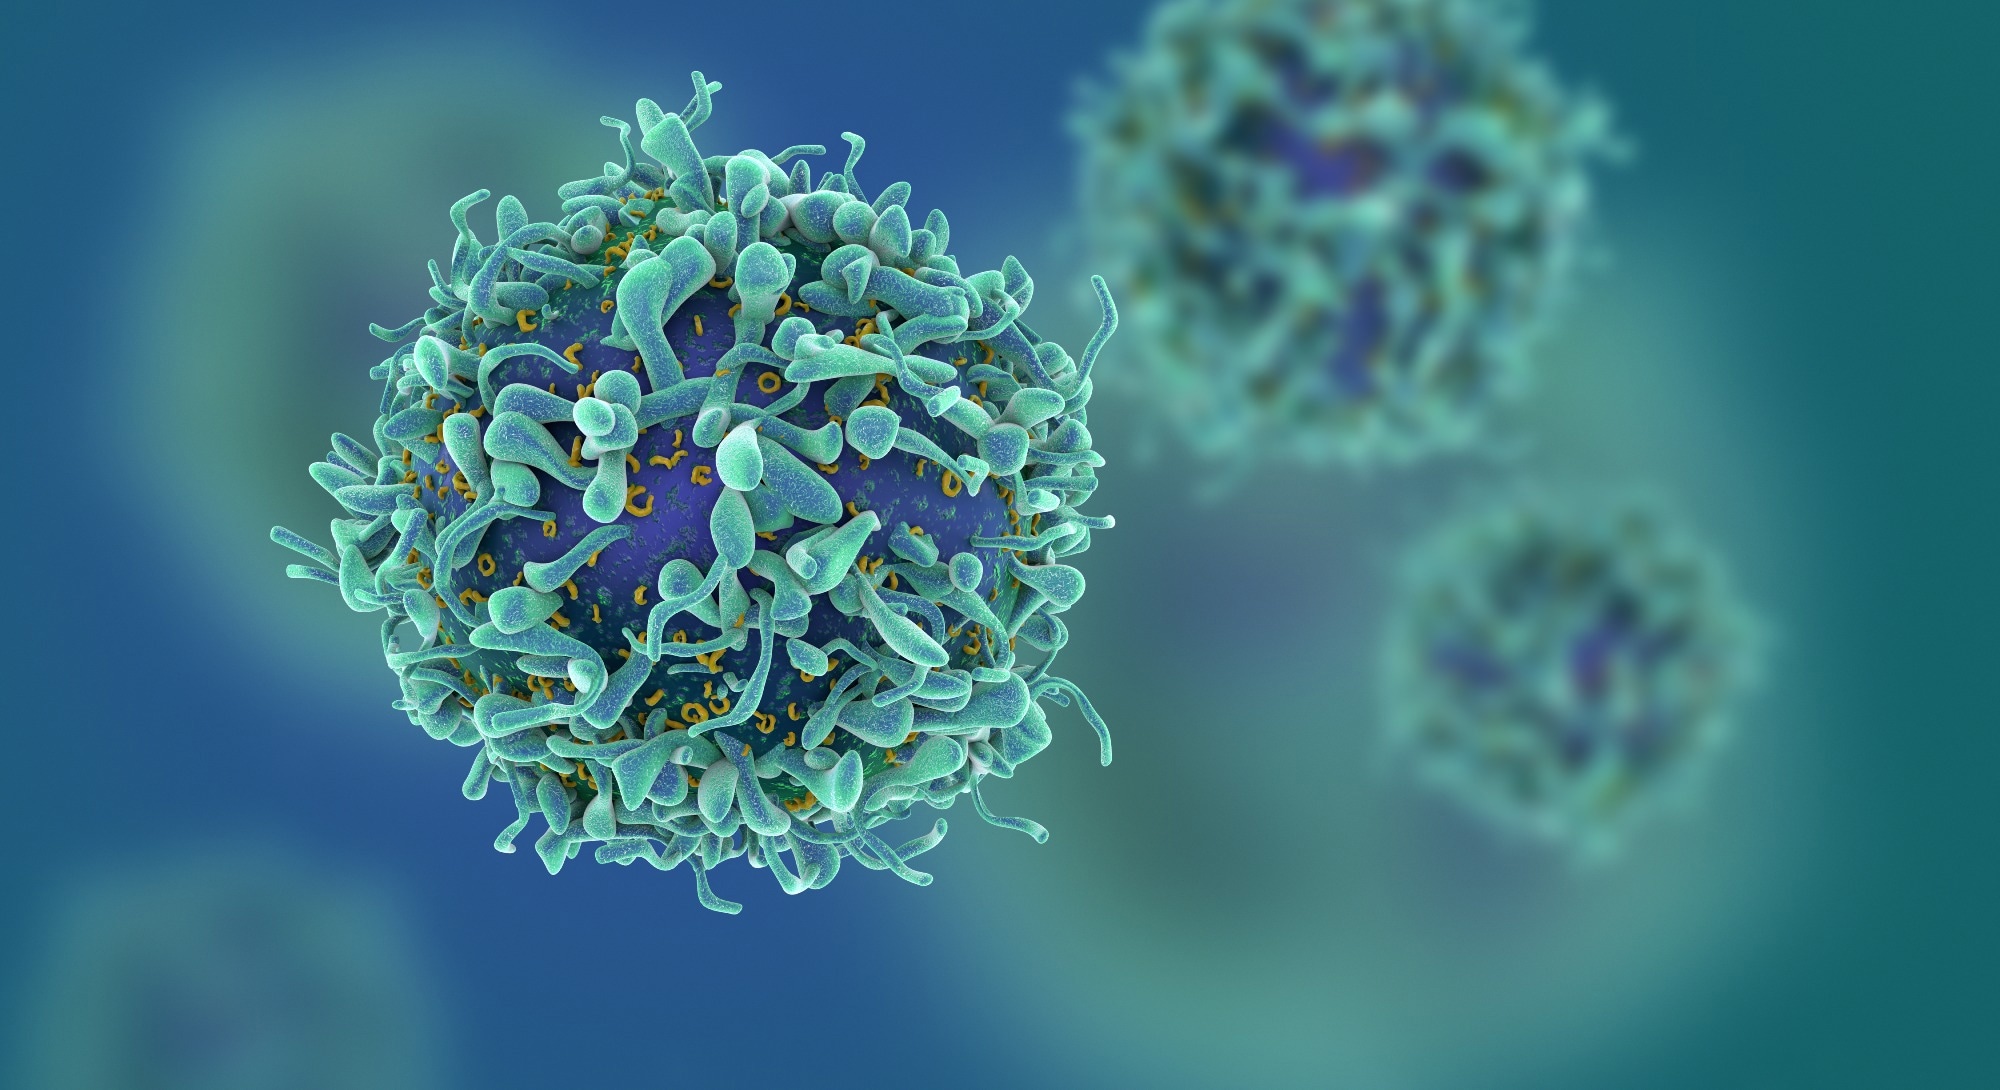 Study: SARS-CoV-2 Omicron BA.4/BA.5 Mutations in Spike Leading to T Cell Escape in Recently Vaccinated Individuals. Image Credit: fusebulb / Shutterstock